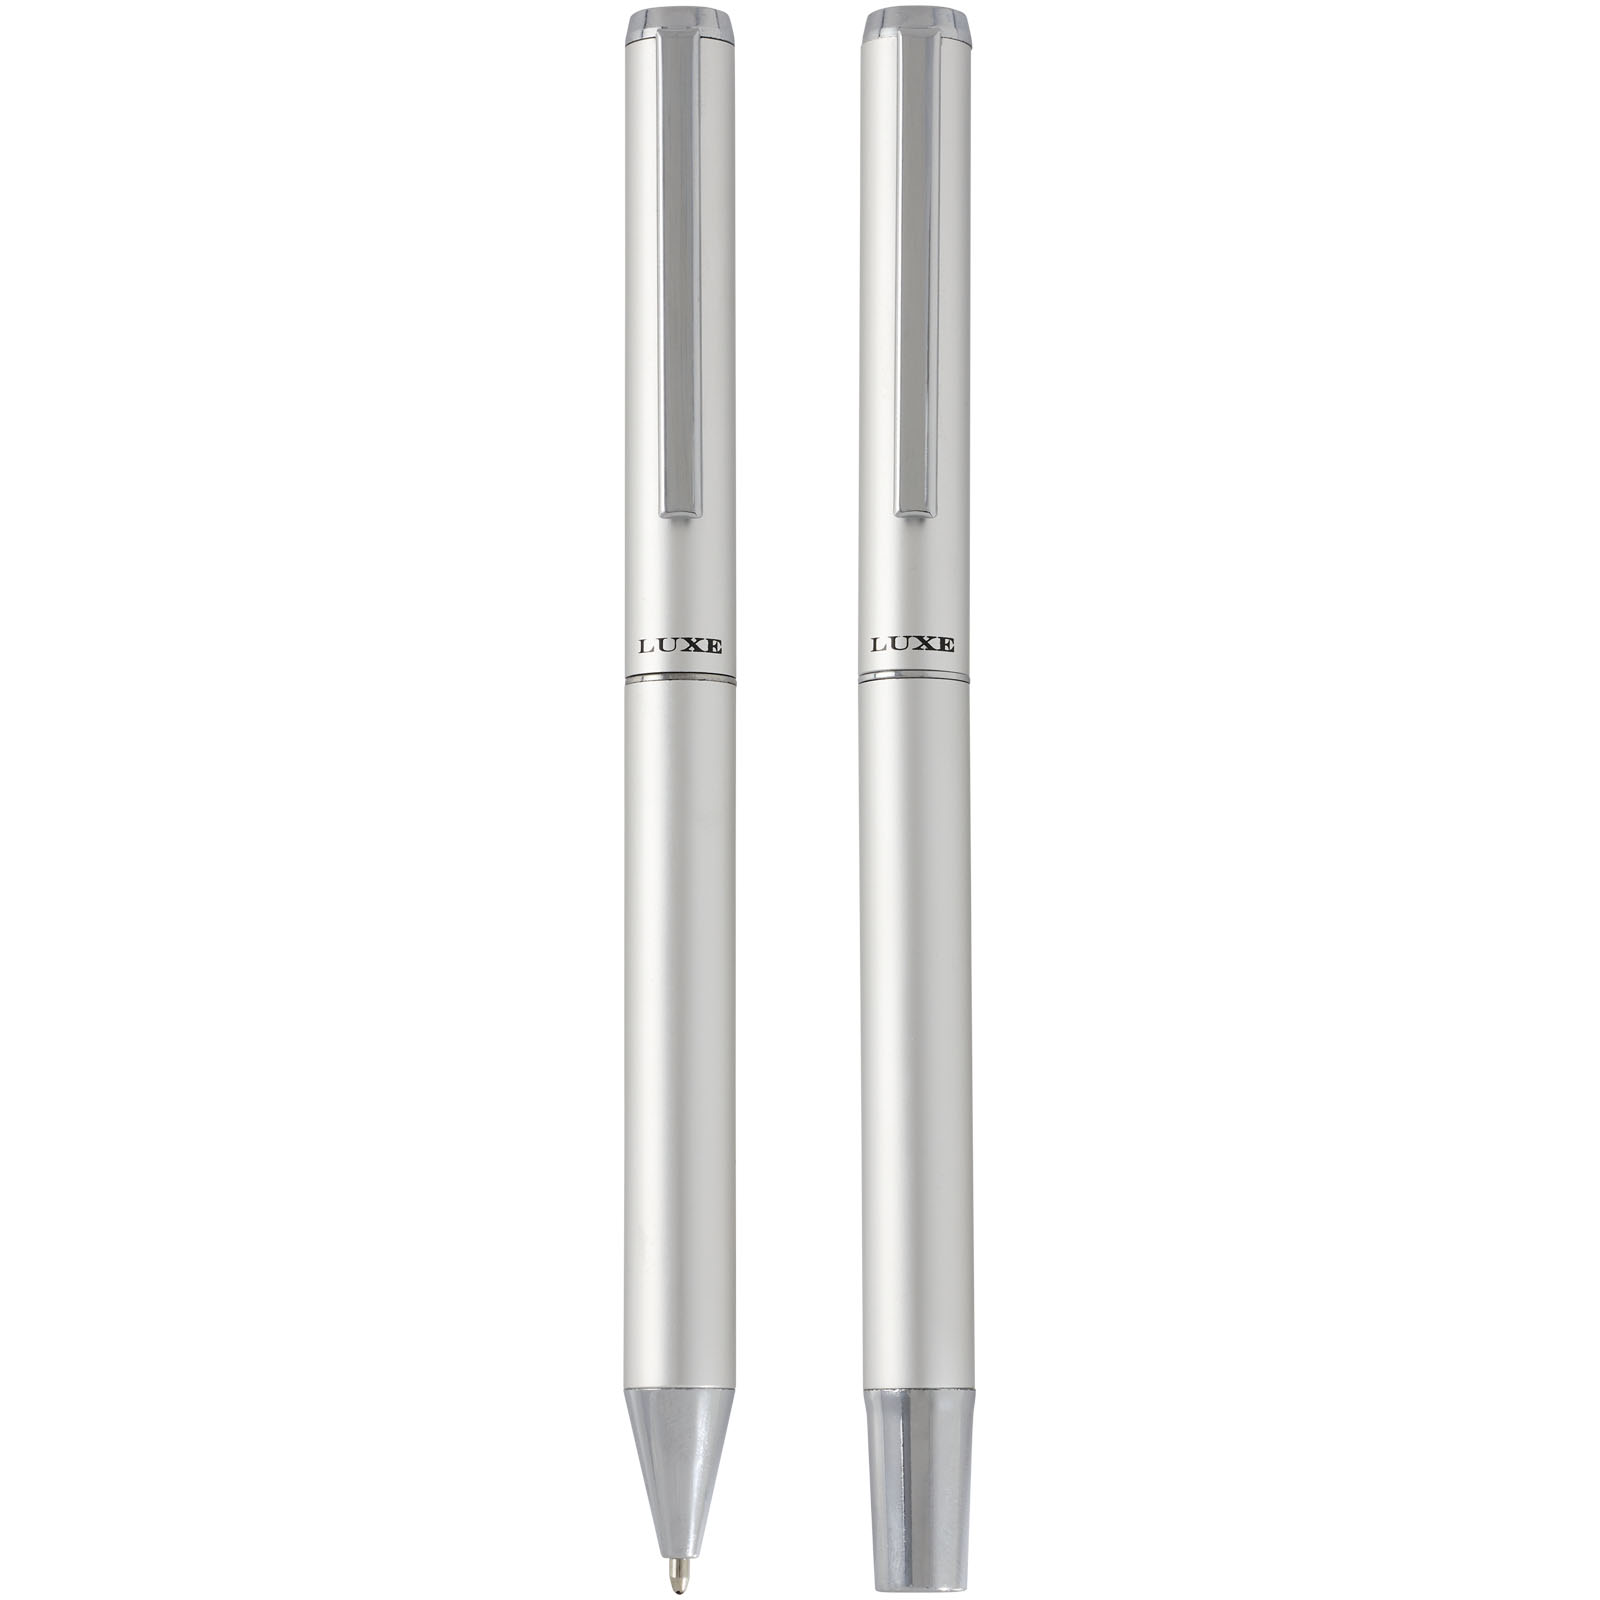 Advertising Gift sets - Lucetto recycled aluminium ballpoint and rollerball pen gift set - 2